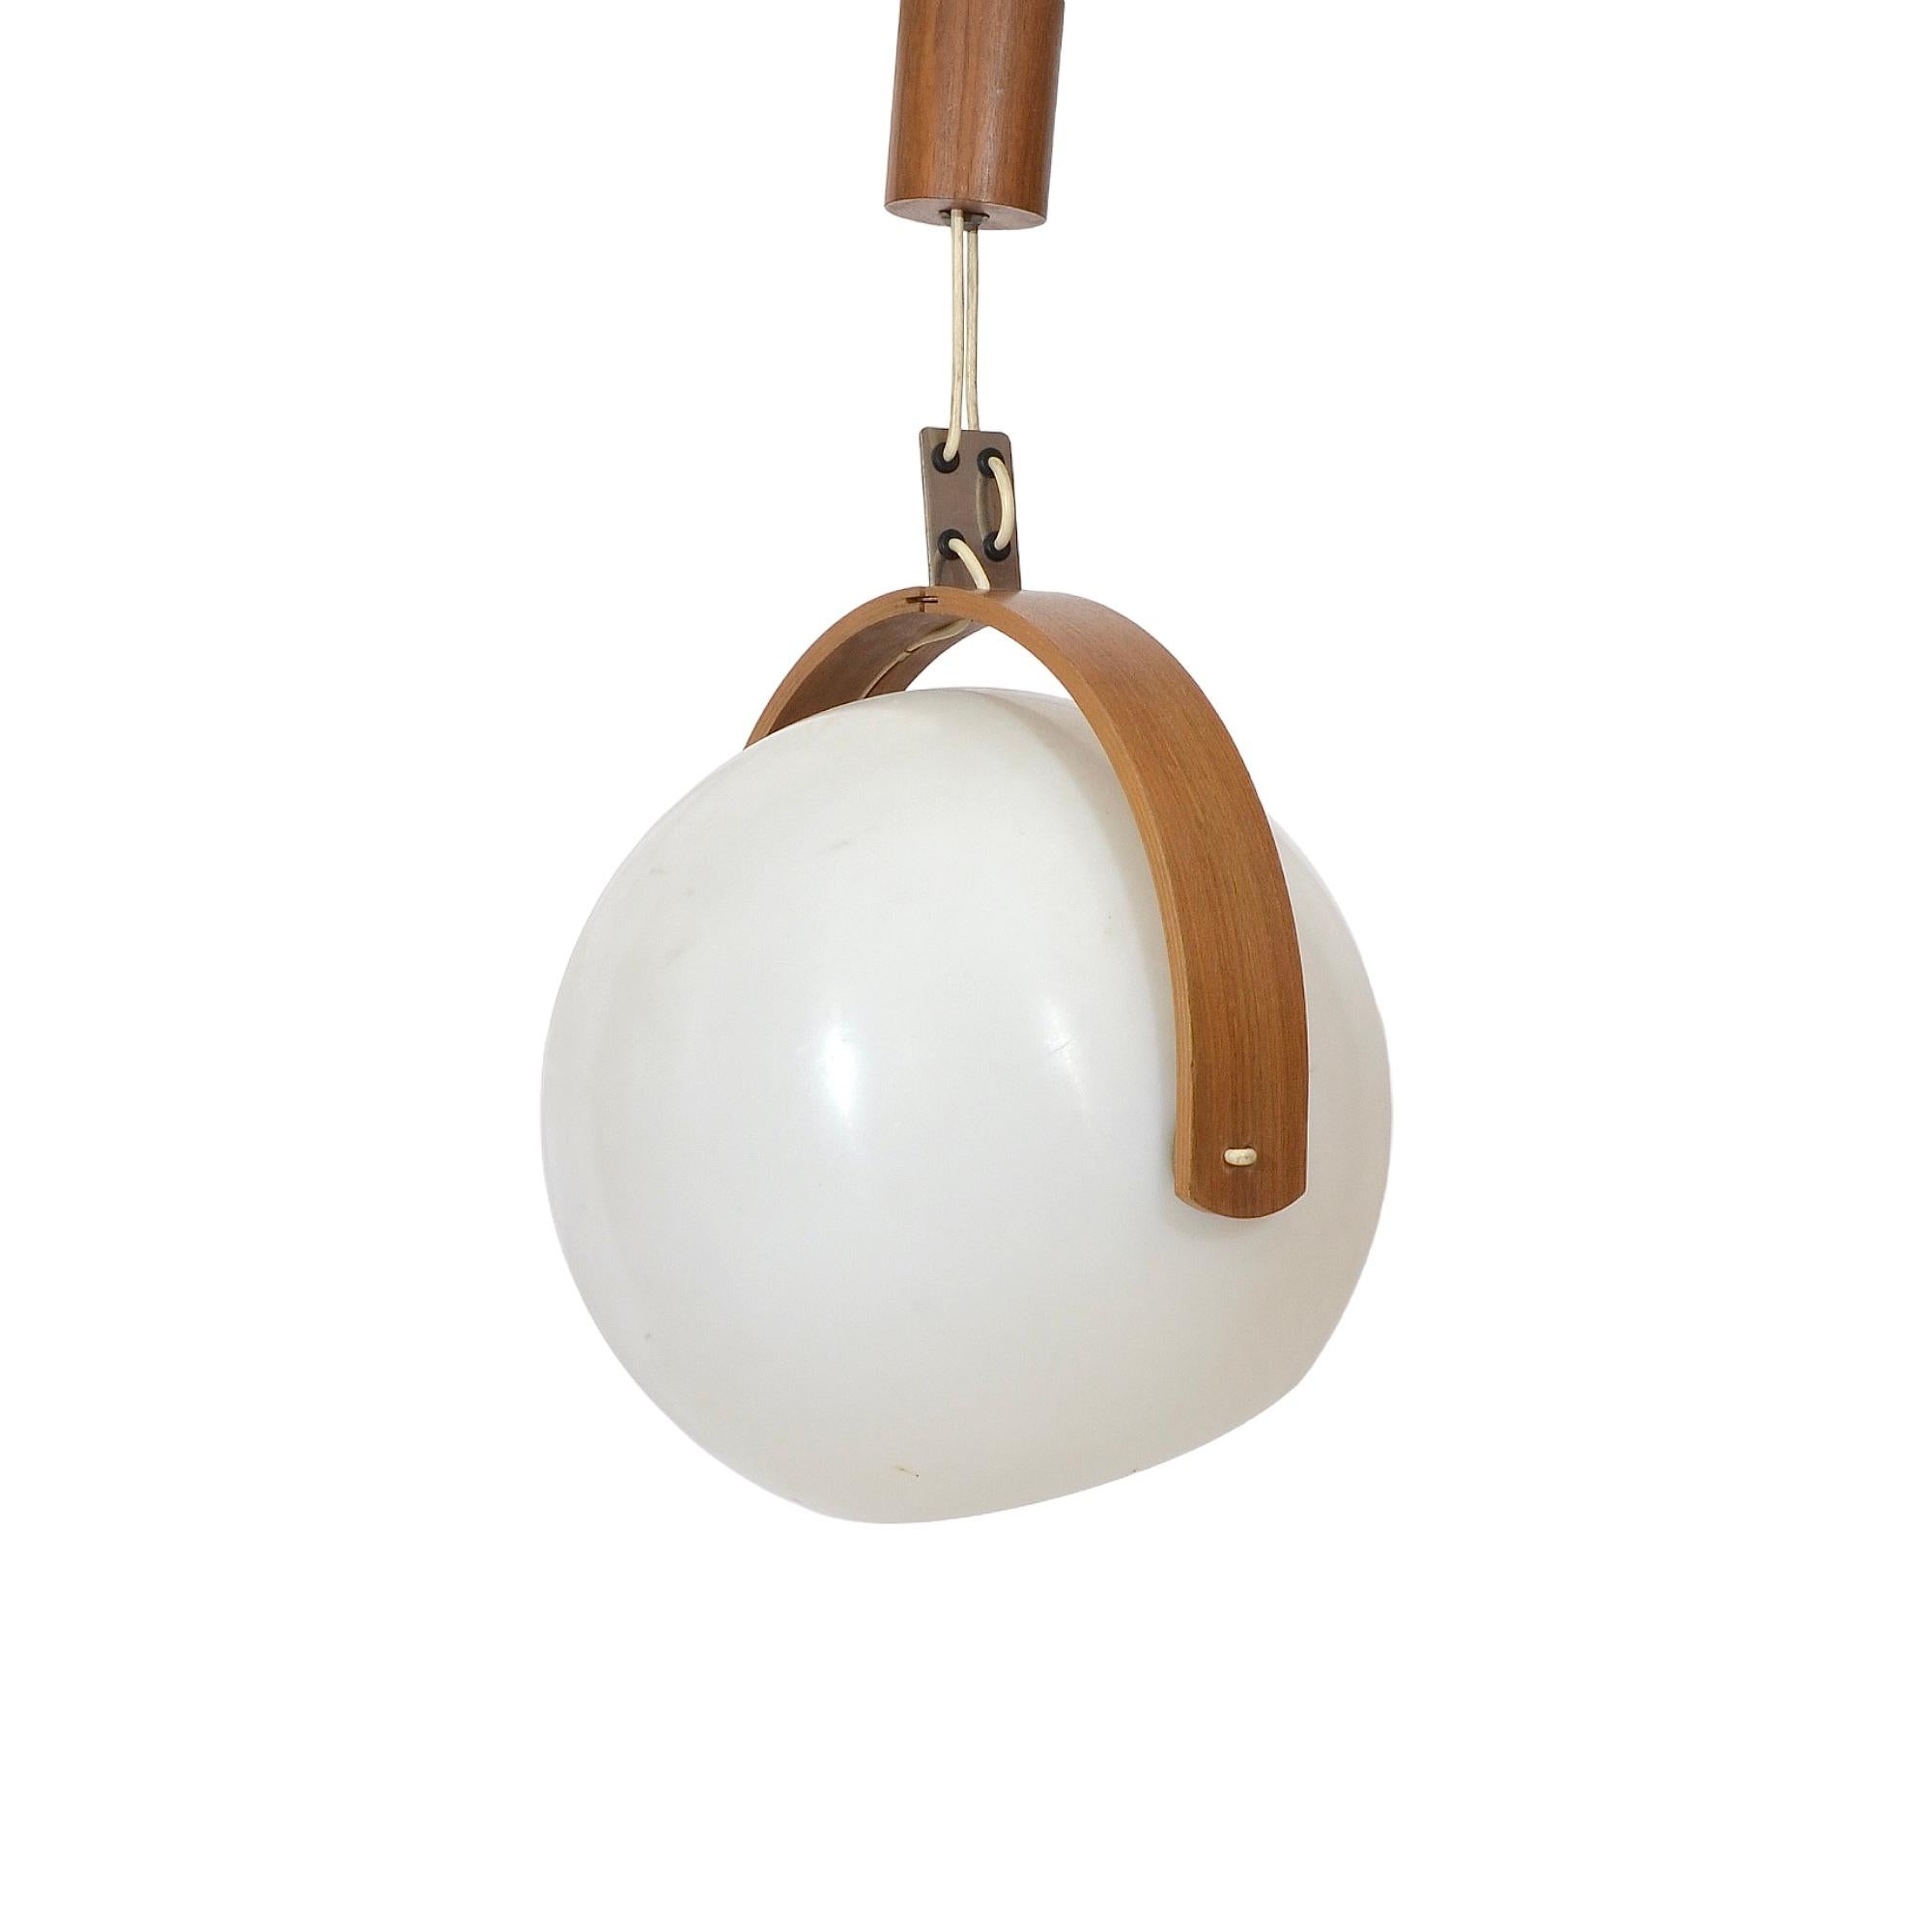 This large plastic sphere mounted on a curved teak plywood ring recalls the glory days of the Space Age era.

The globe can easily be moved on its horizontal axis to direct the direct light, otherwise opt for a softer diffusion by letting it pass